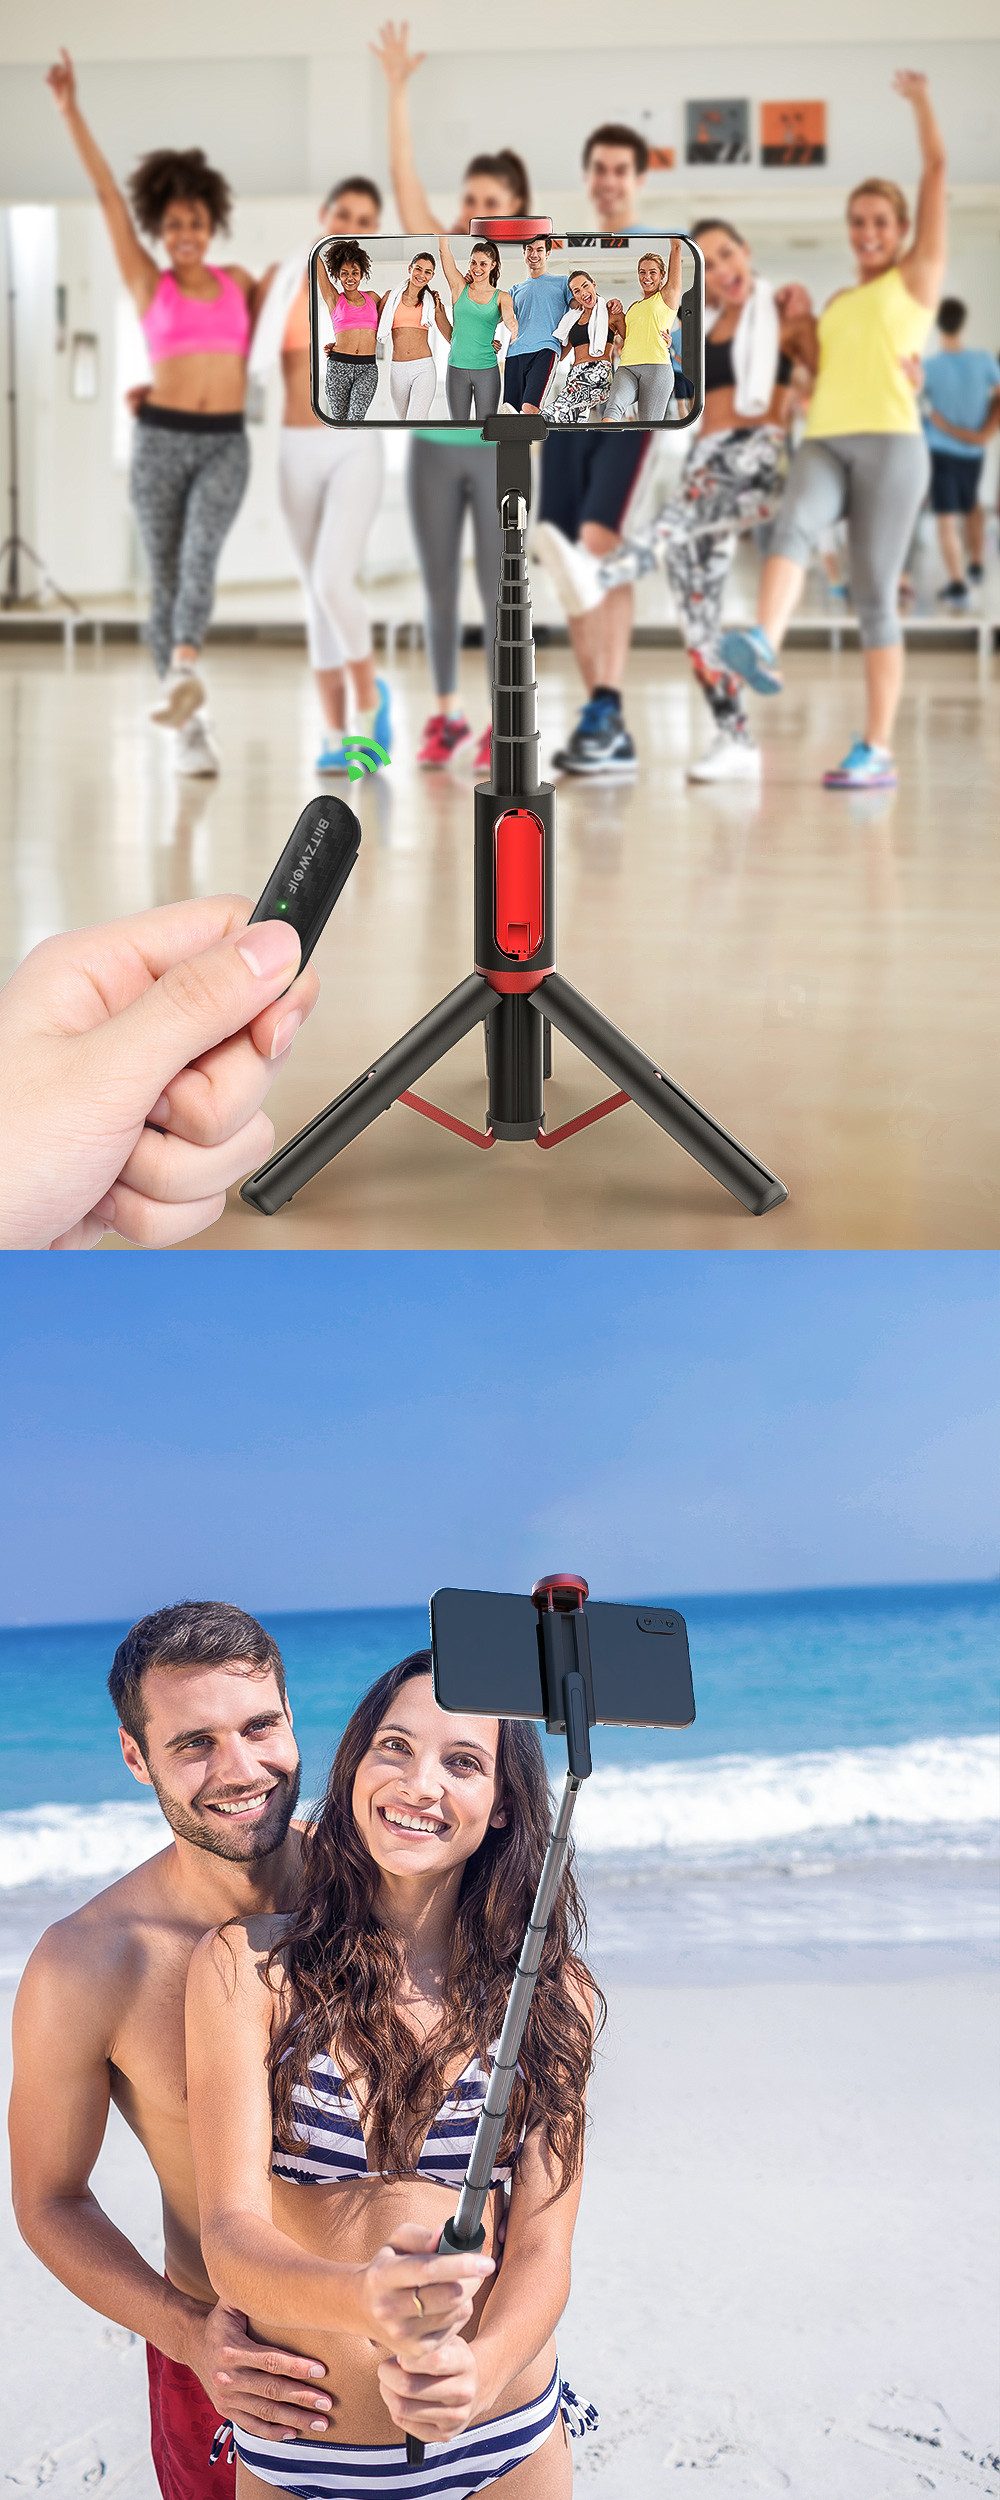 BlitzWolf® BW-BS10 All In One Portable bluetooth Selfie Stick Hidden Phone Clamp with Retractable Tripod